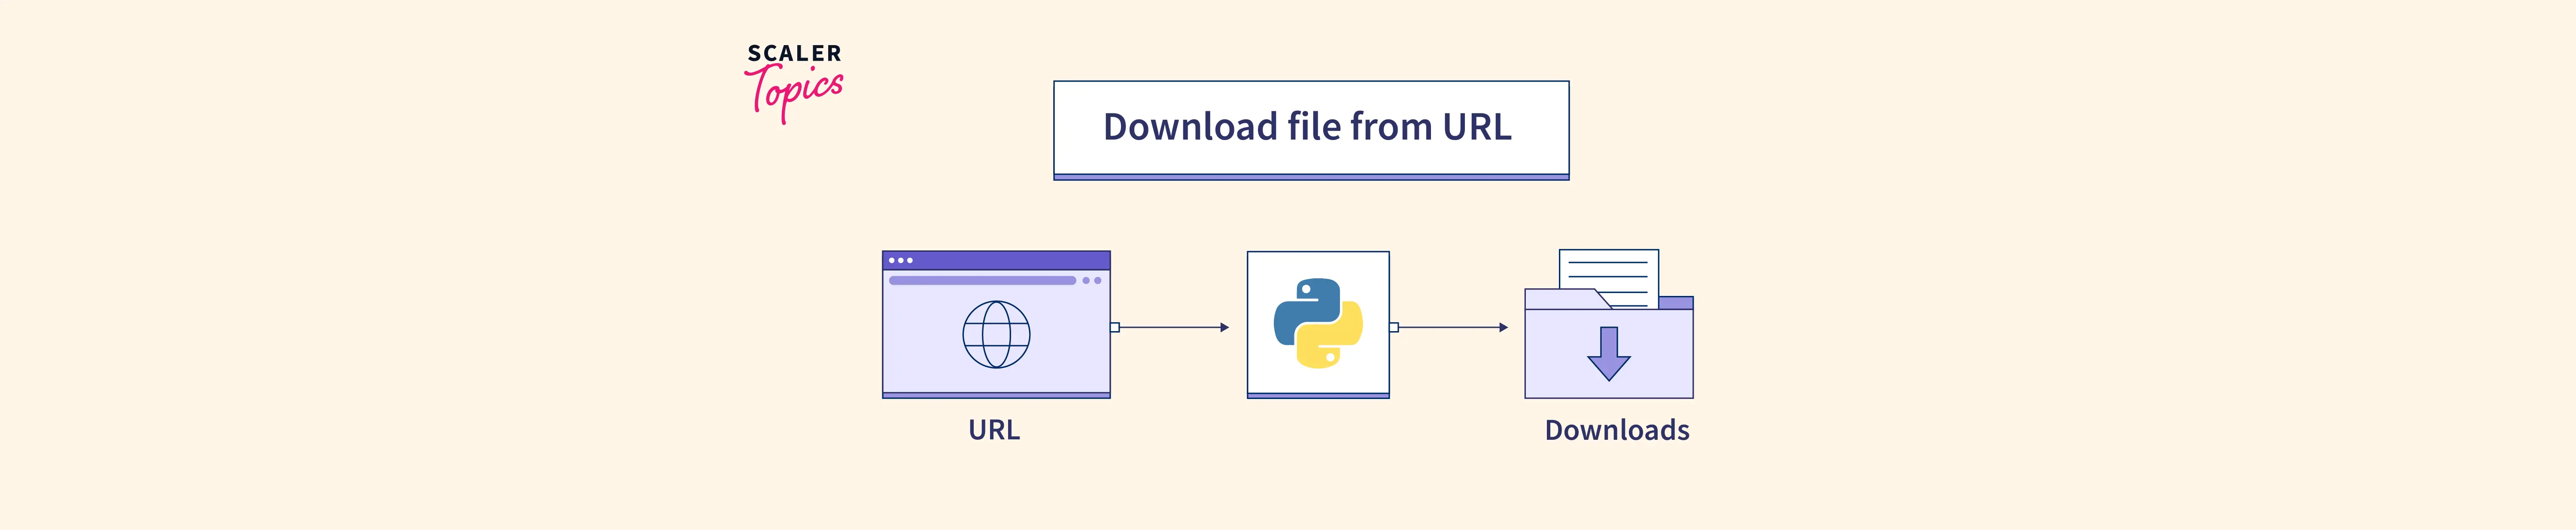 Python Program To Download File From Url - Scaler Topics